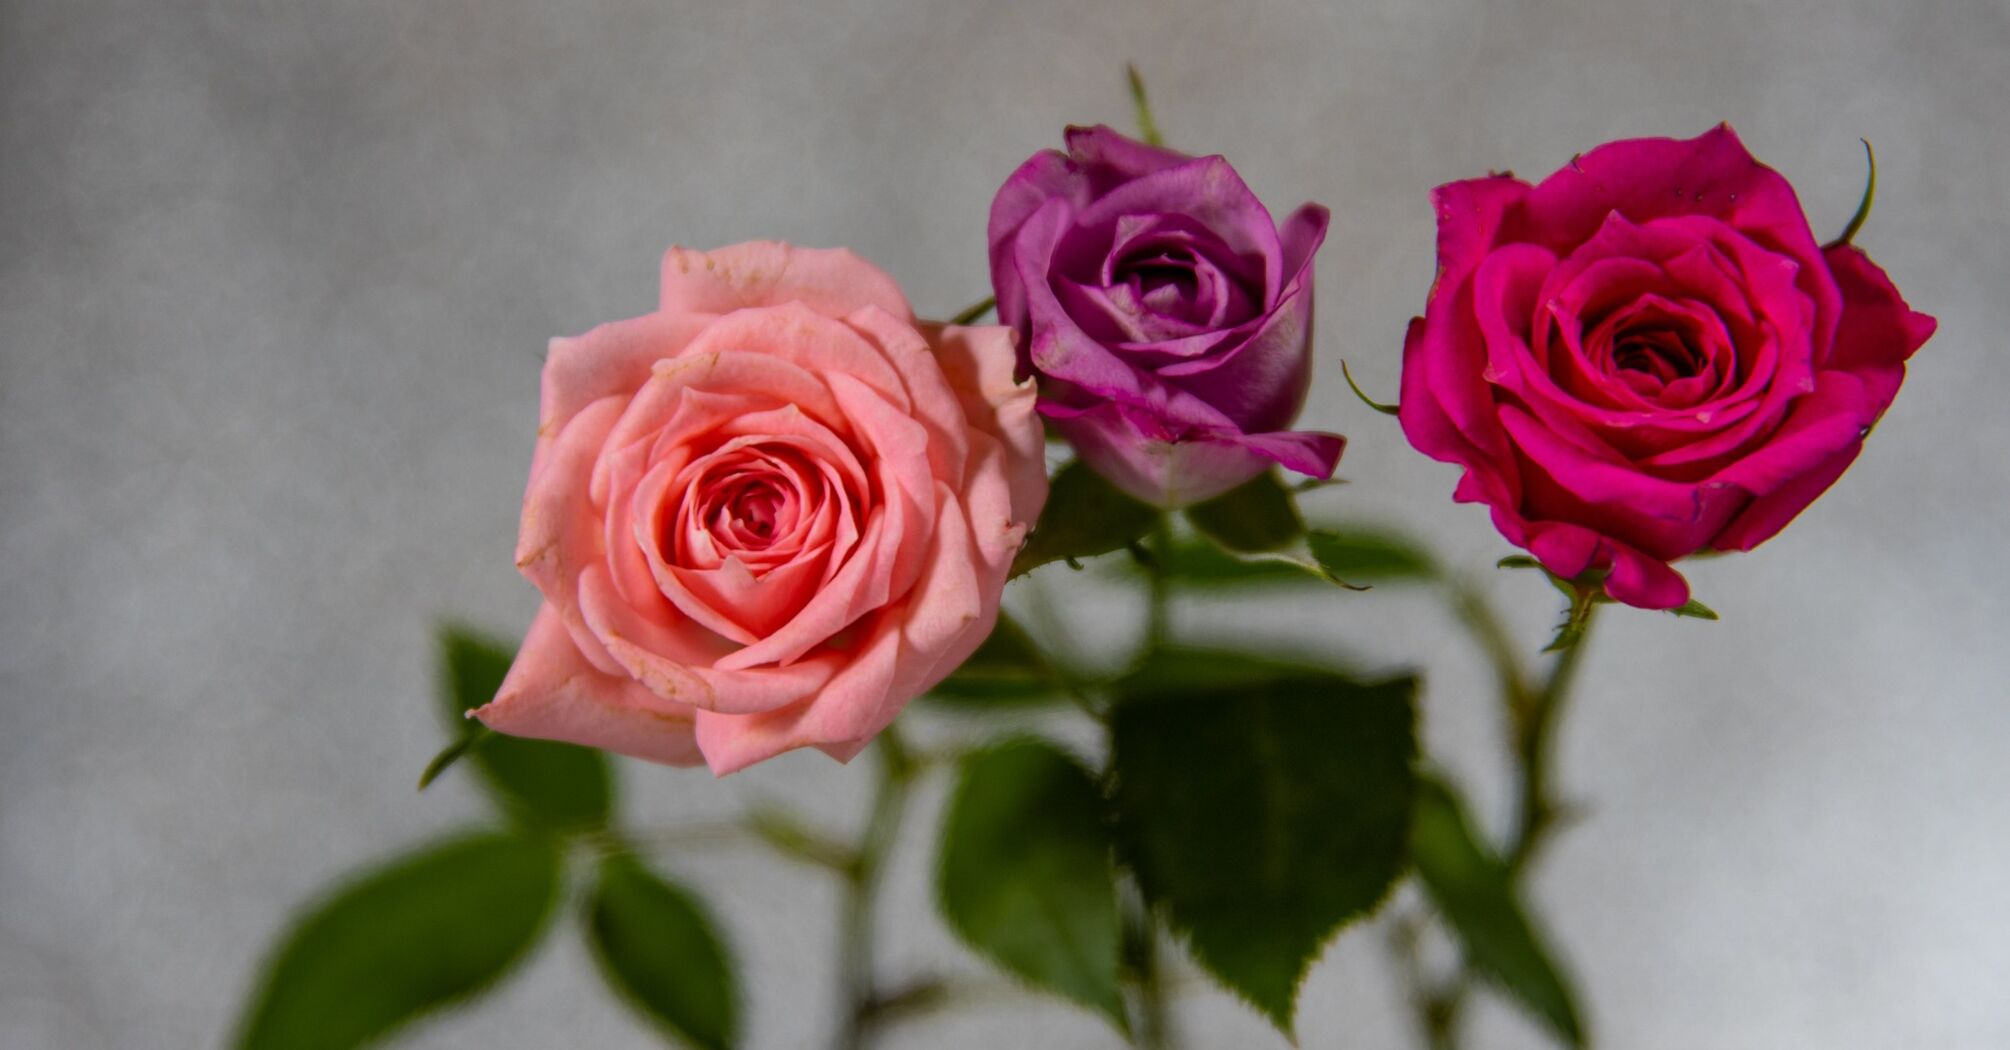 How to preserve the freshness and beauty of roses for as long as possible